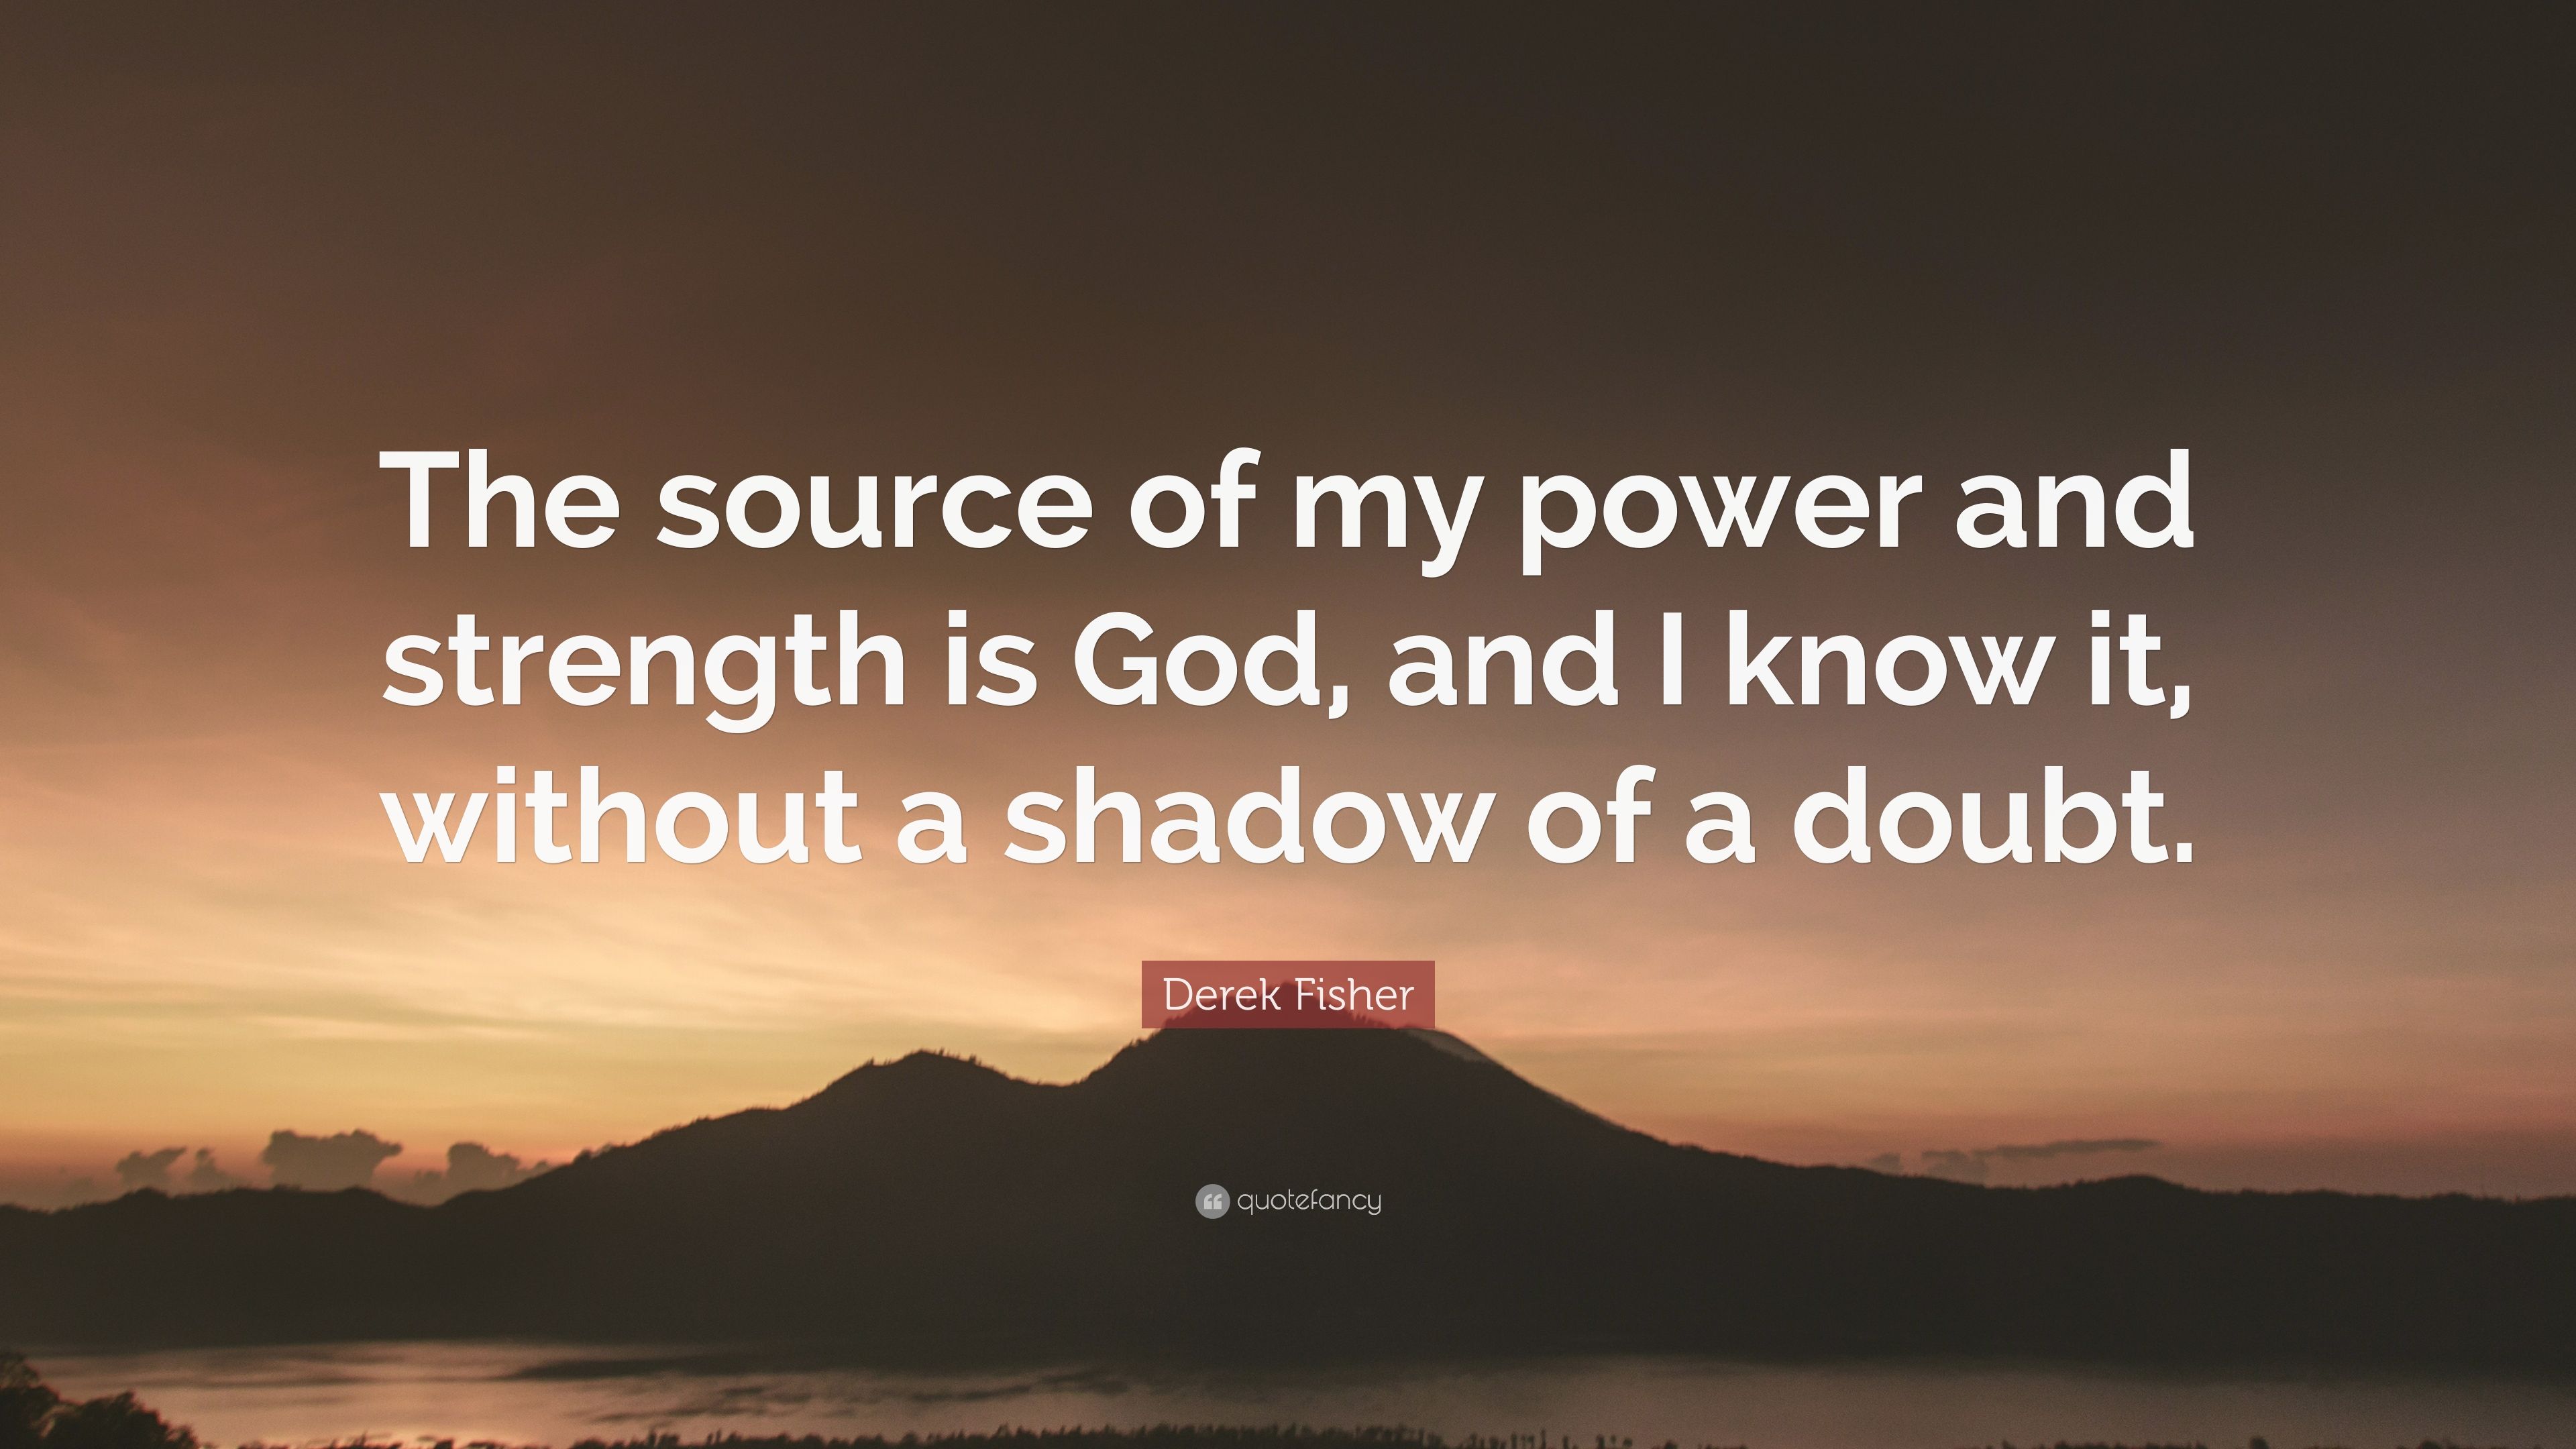 Derek Fisher Quote: “The source of my power and strength is God, and I know it